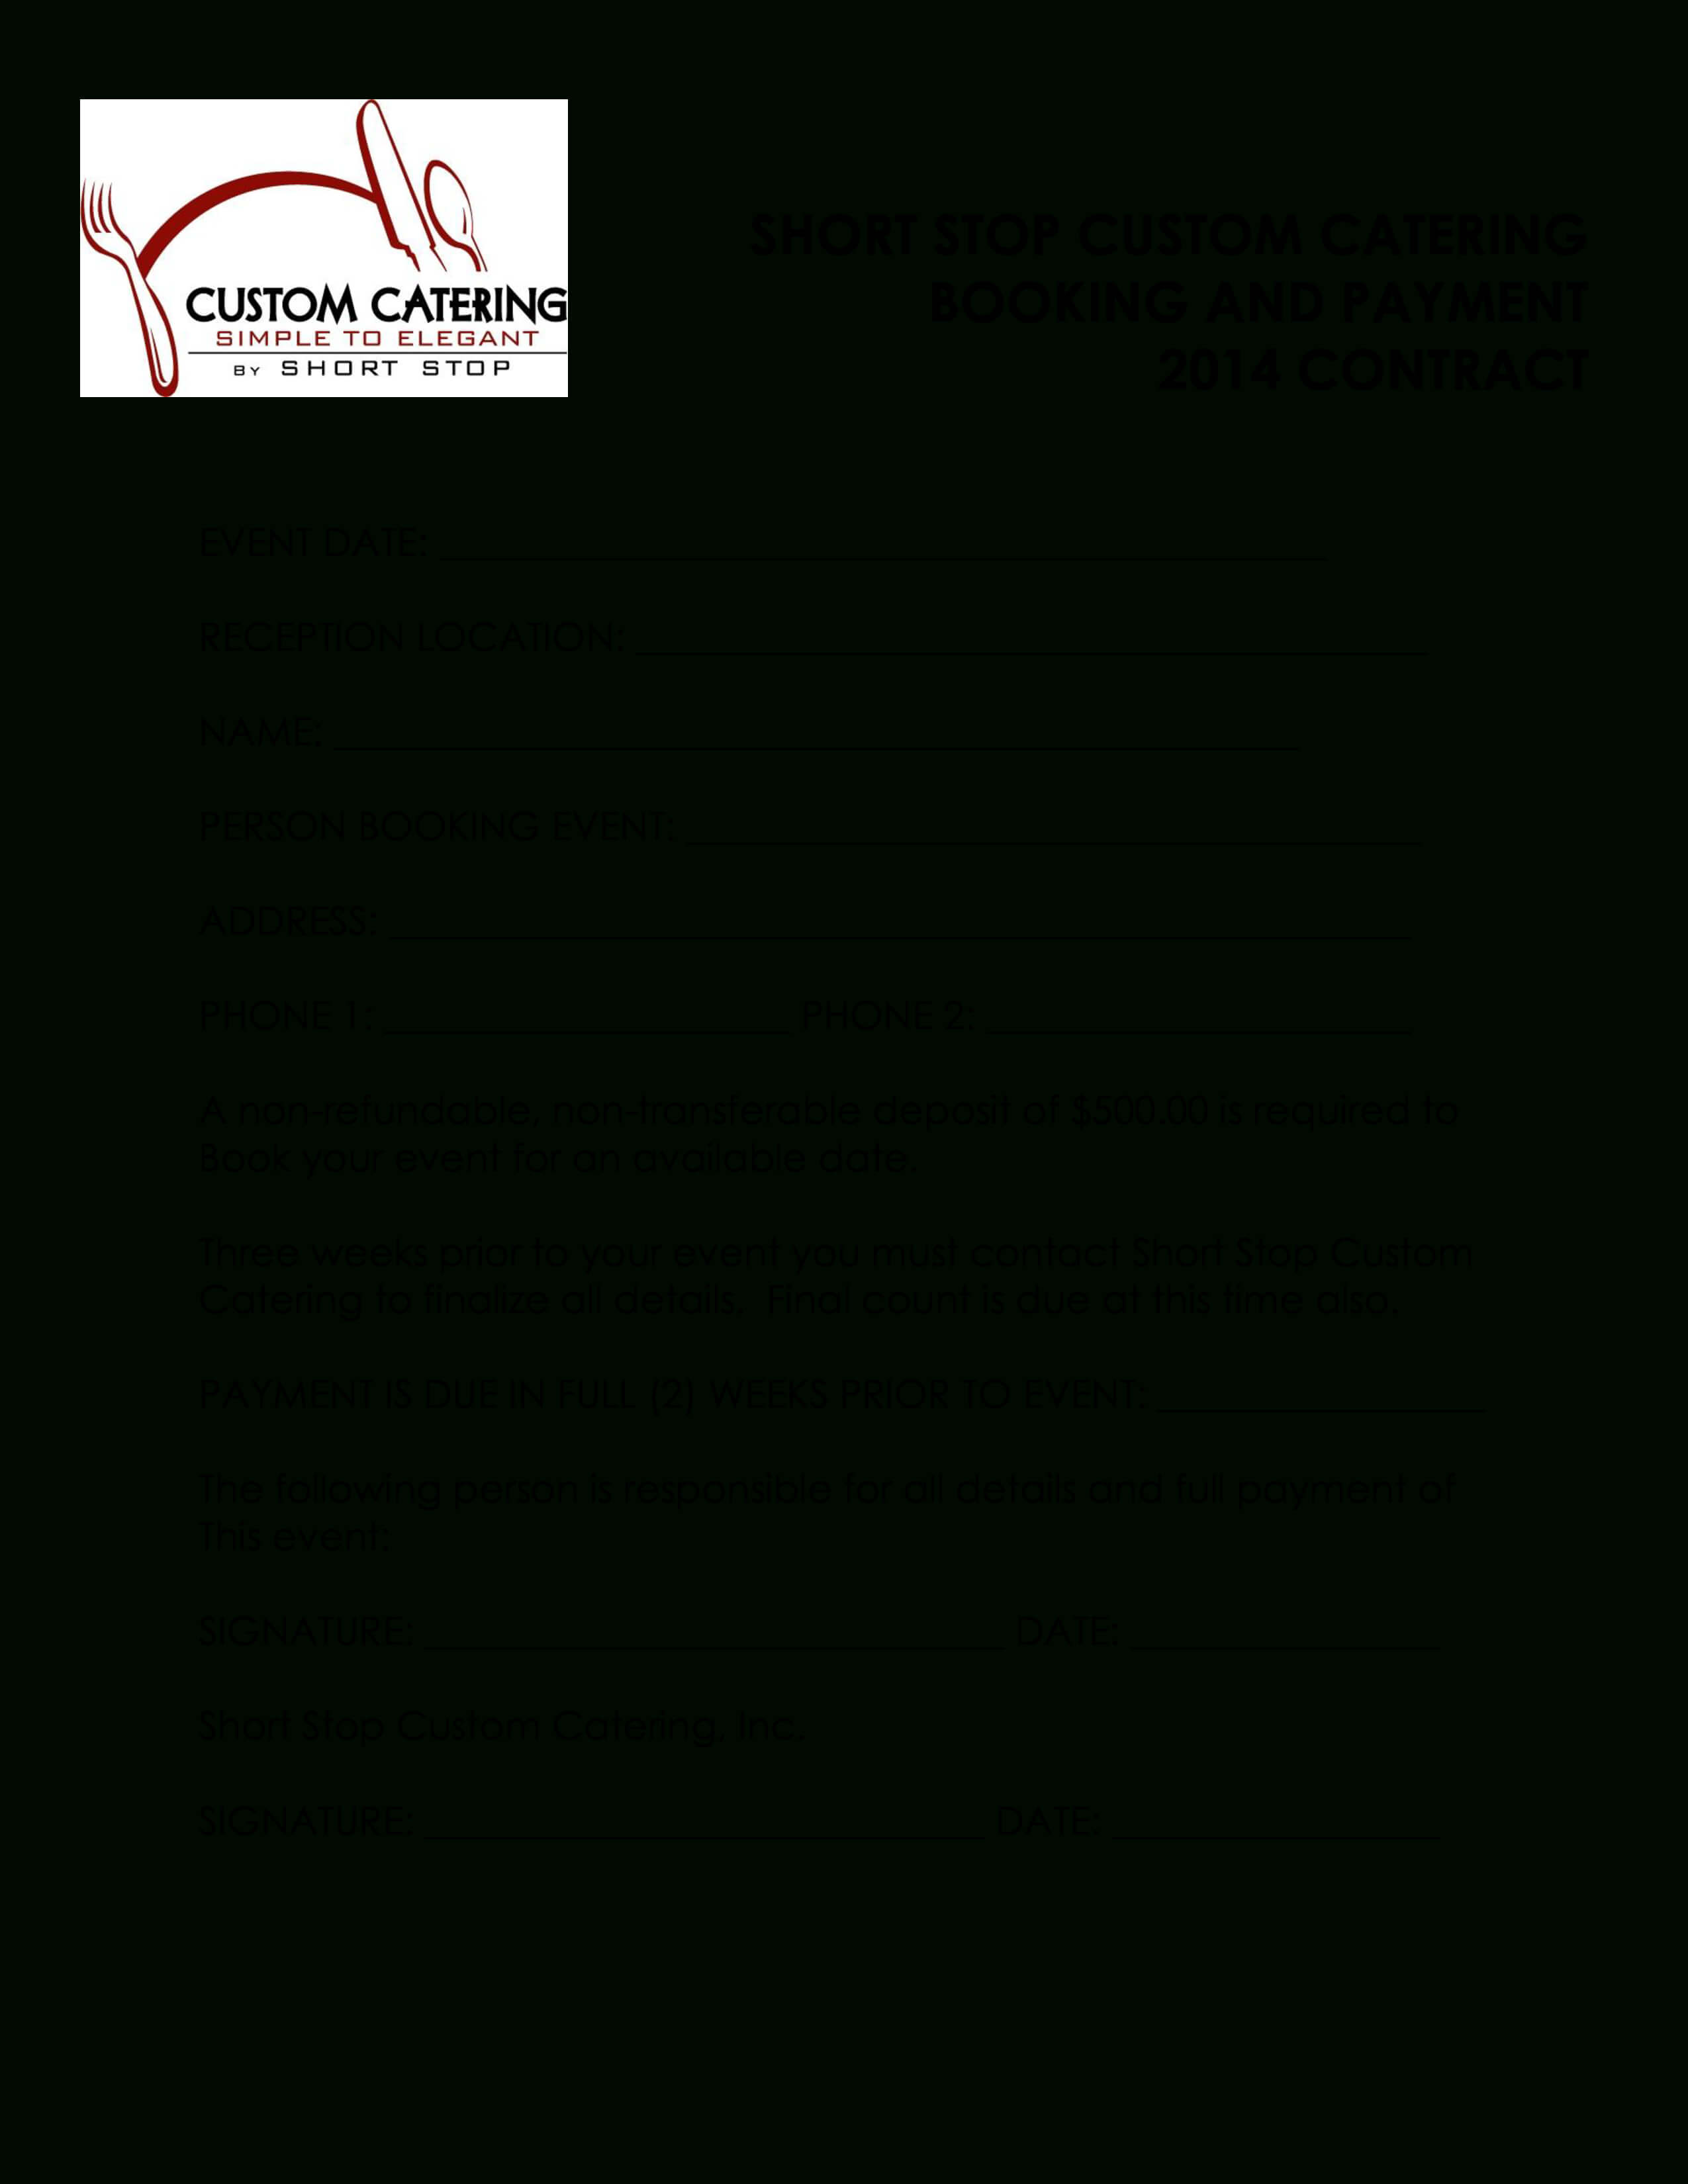 019 Free Catering Contract Template Ideas 2Eebed085048 1 With Regard To Catering Contract Template Word